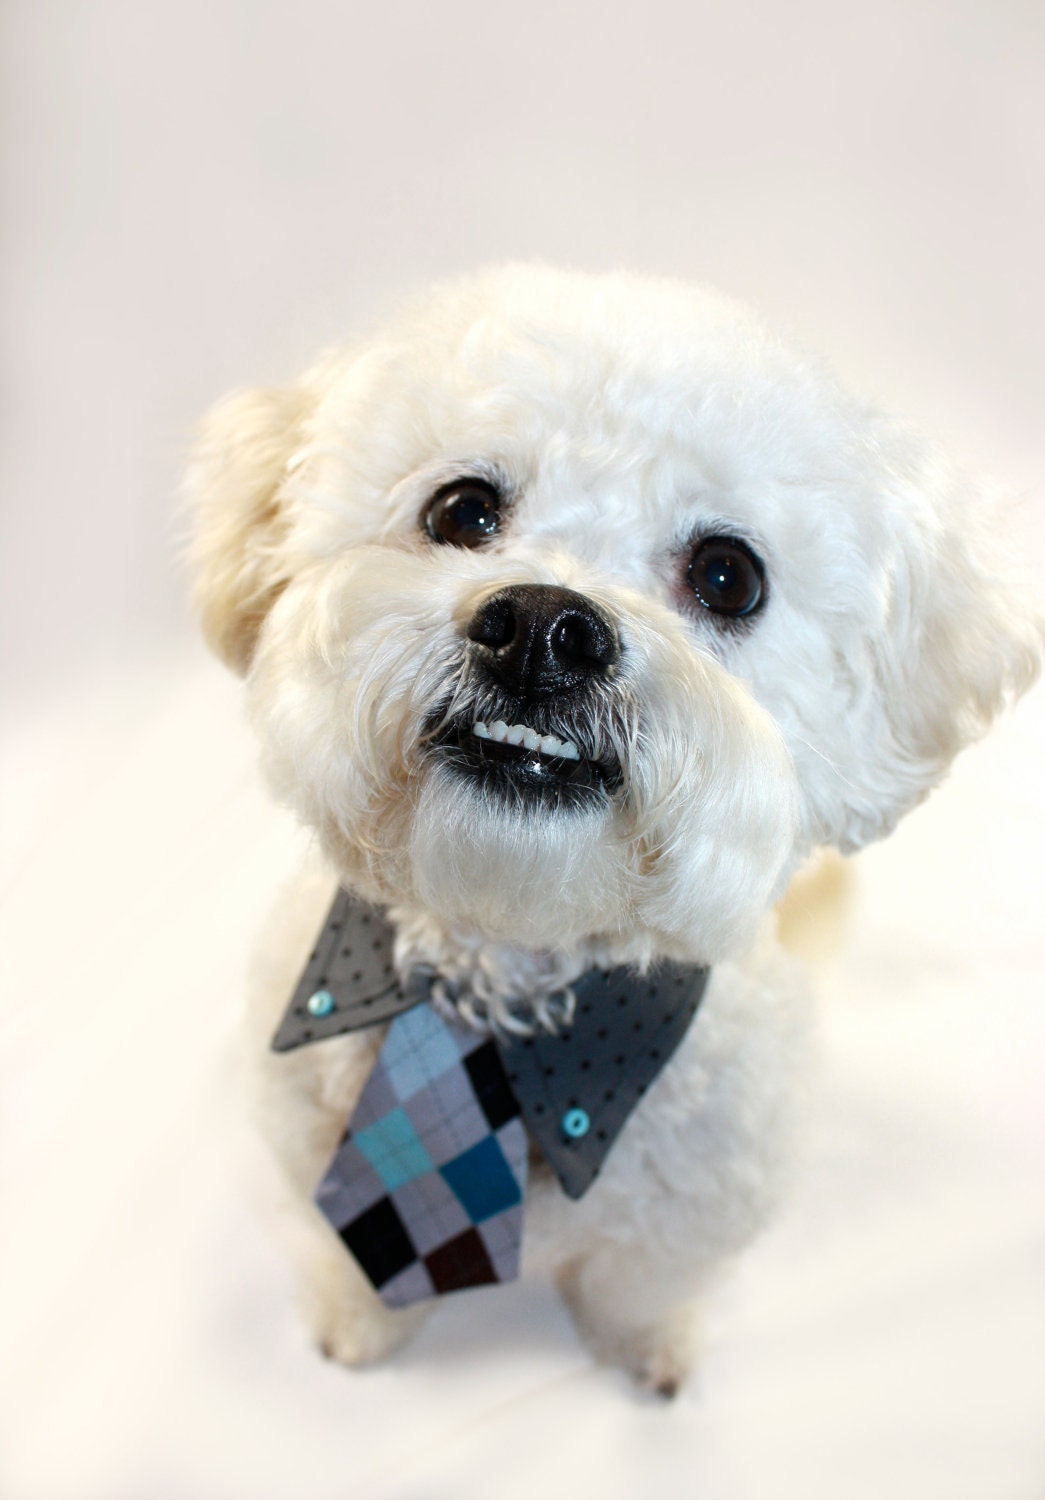 Dog collar shirt and tie by HenryandCoPets on Etsy